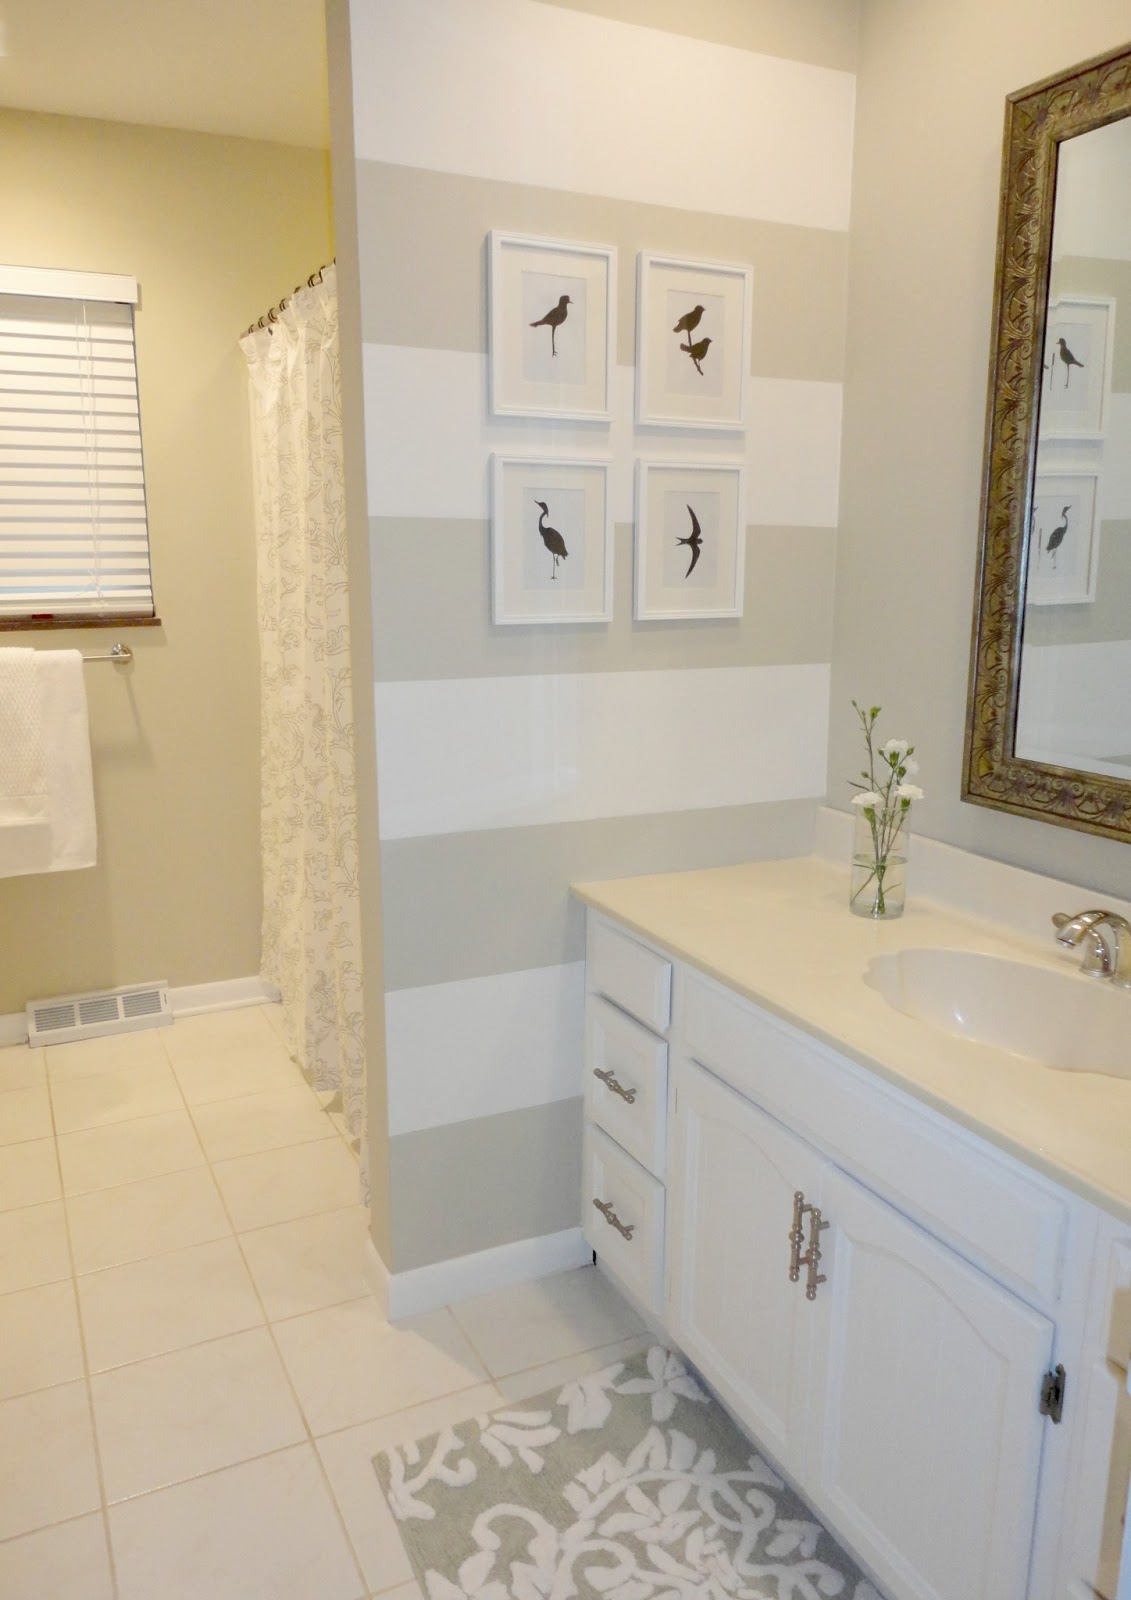 Bathrooms With Painted Walls